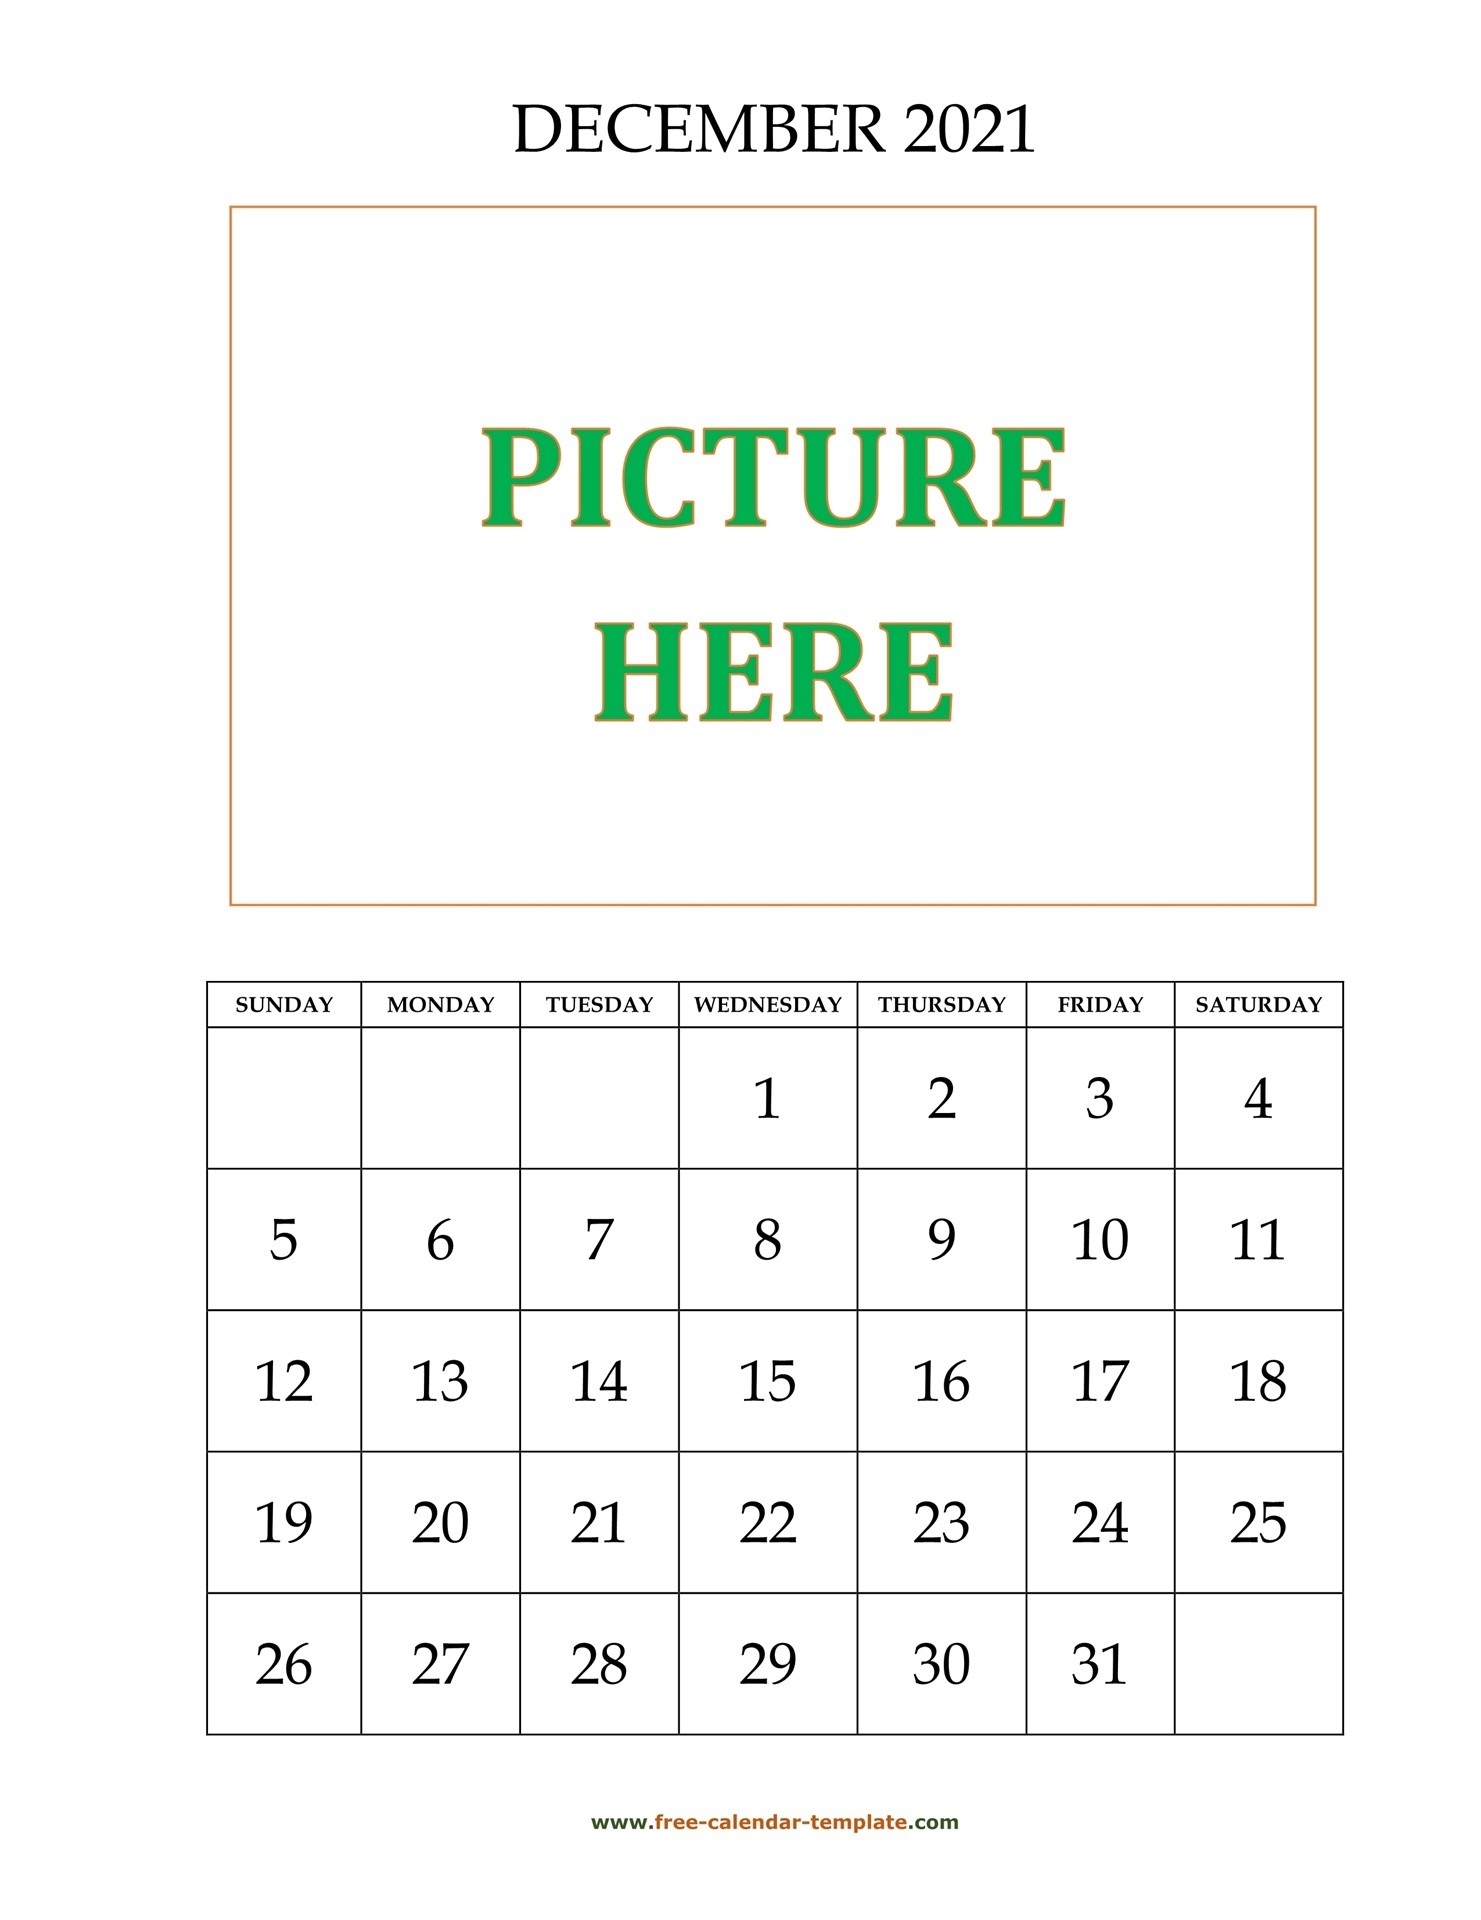 December Printable 2021 Calendar, Space For Add Picture-Calendar 2021 Shwoing Previous Month